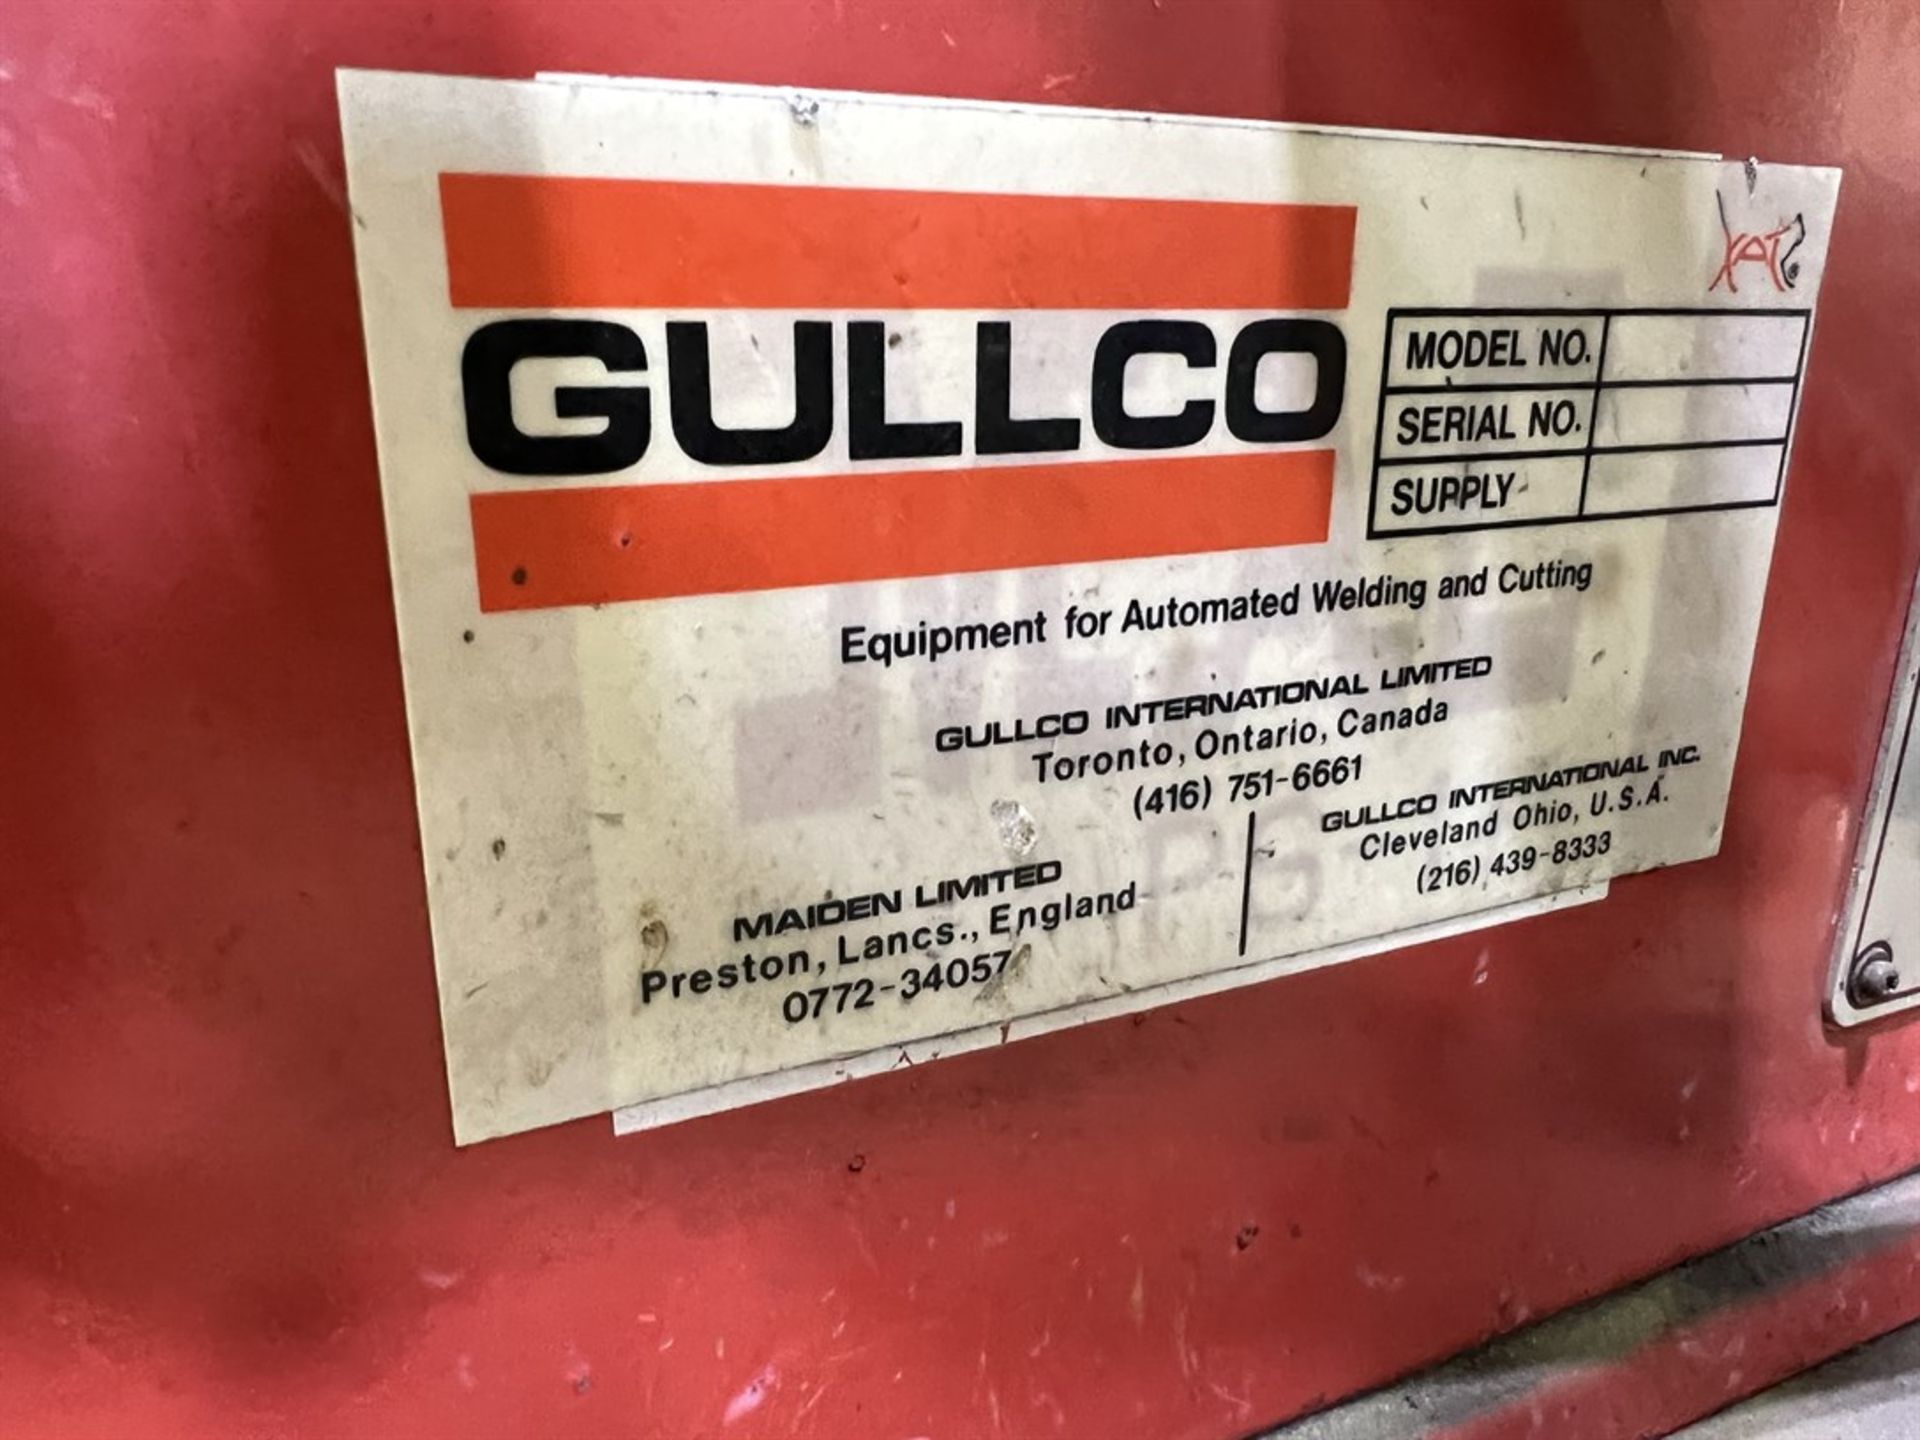 GULLCO Tabletop Welding Positioner, 12" Table, w/ 8" 3-Jaw Chuck (Building 44) - Image 4 of 4